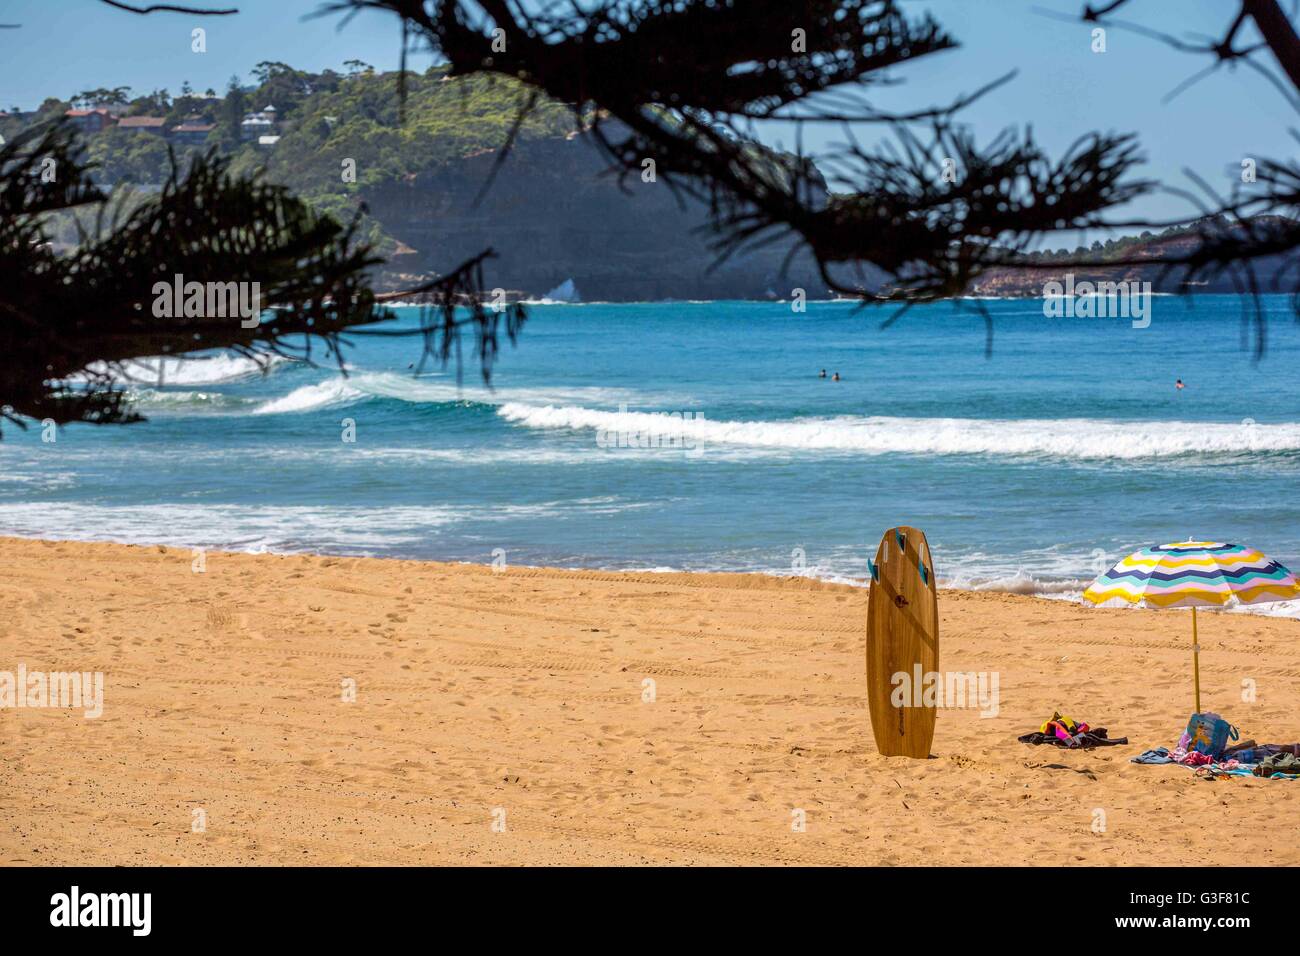 Avoca Beach in NSW Australia when surfing is a passion. Stock Photo